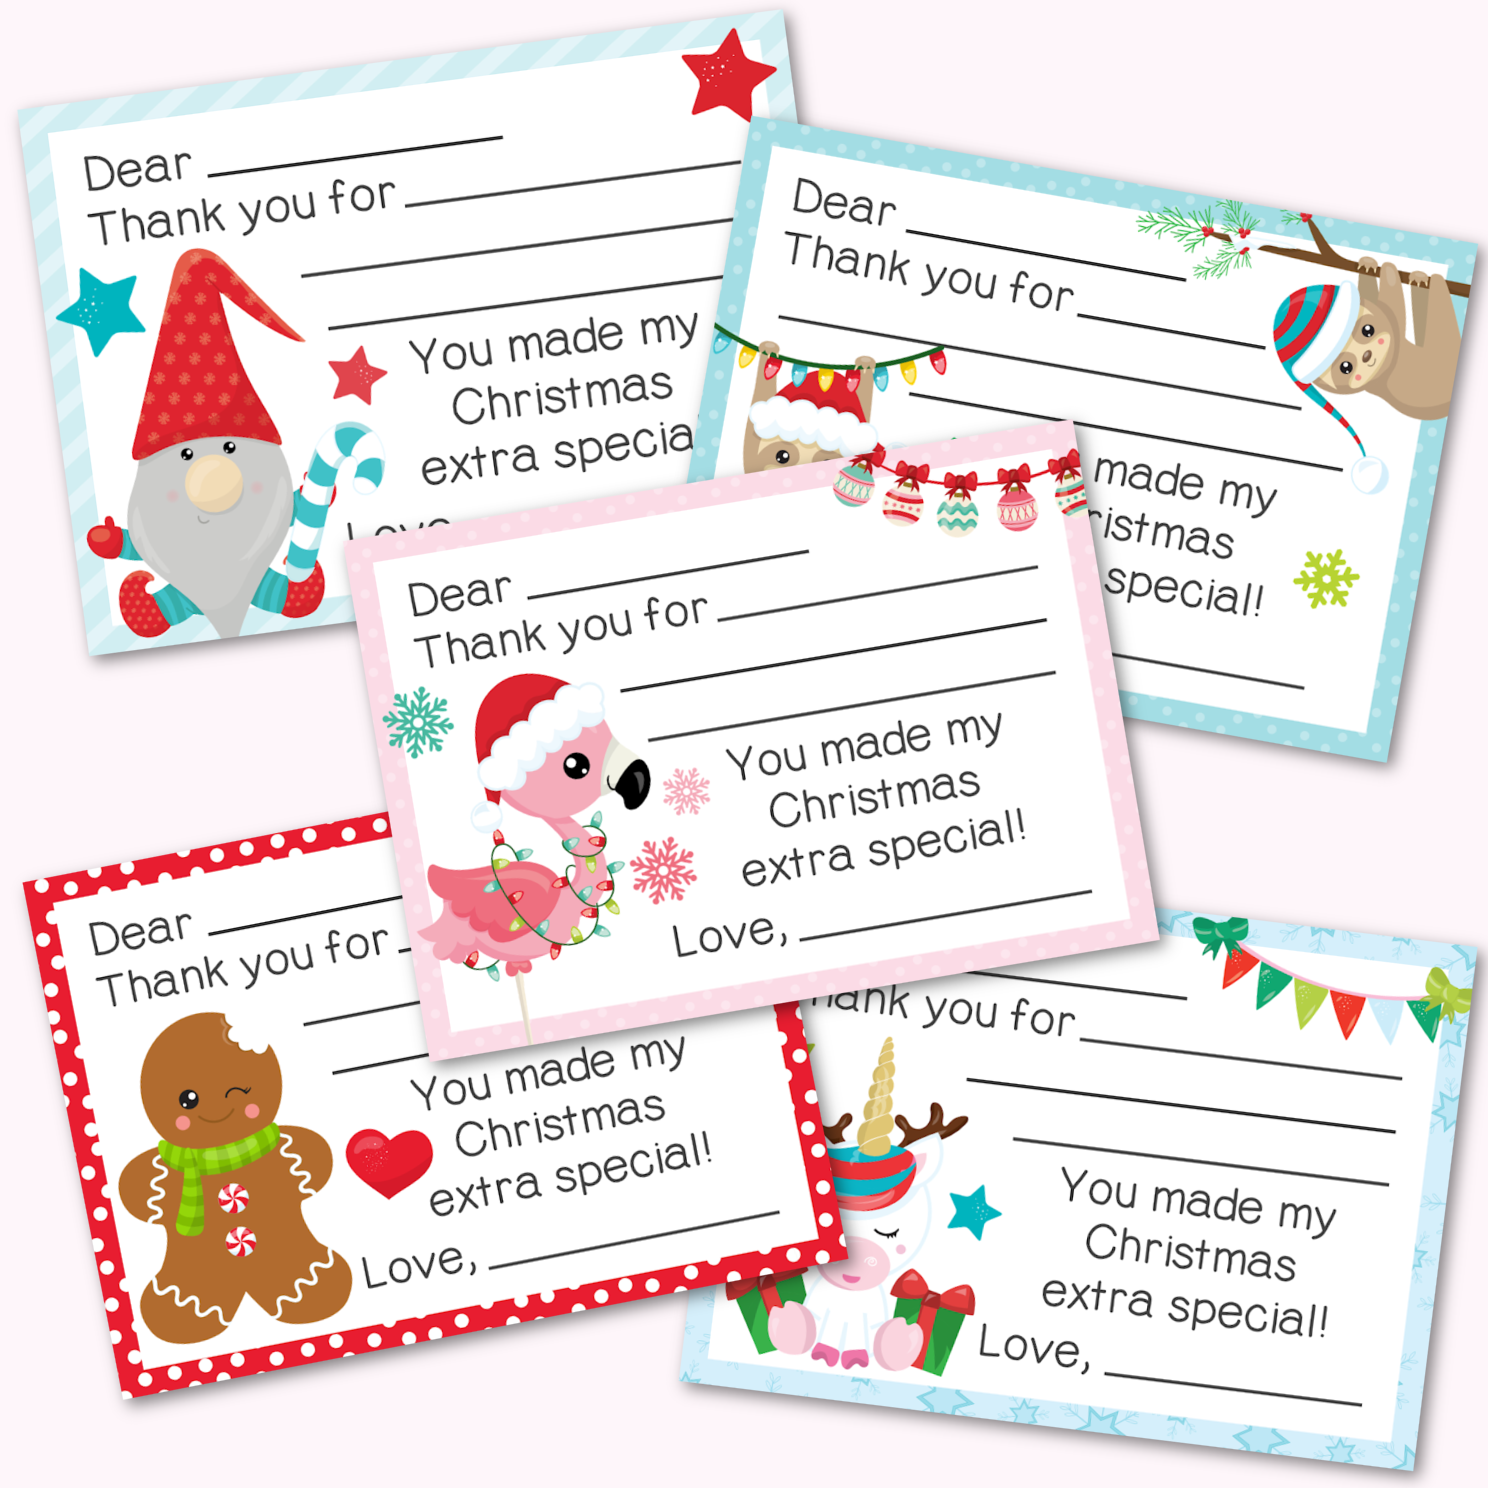 Fill In The Blank Christmas Thank You Cards Free Printable